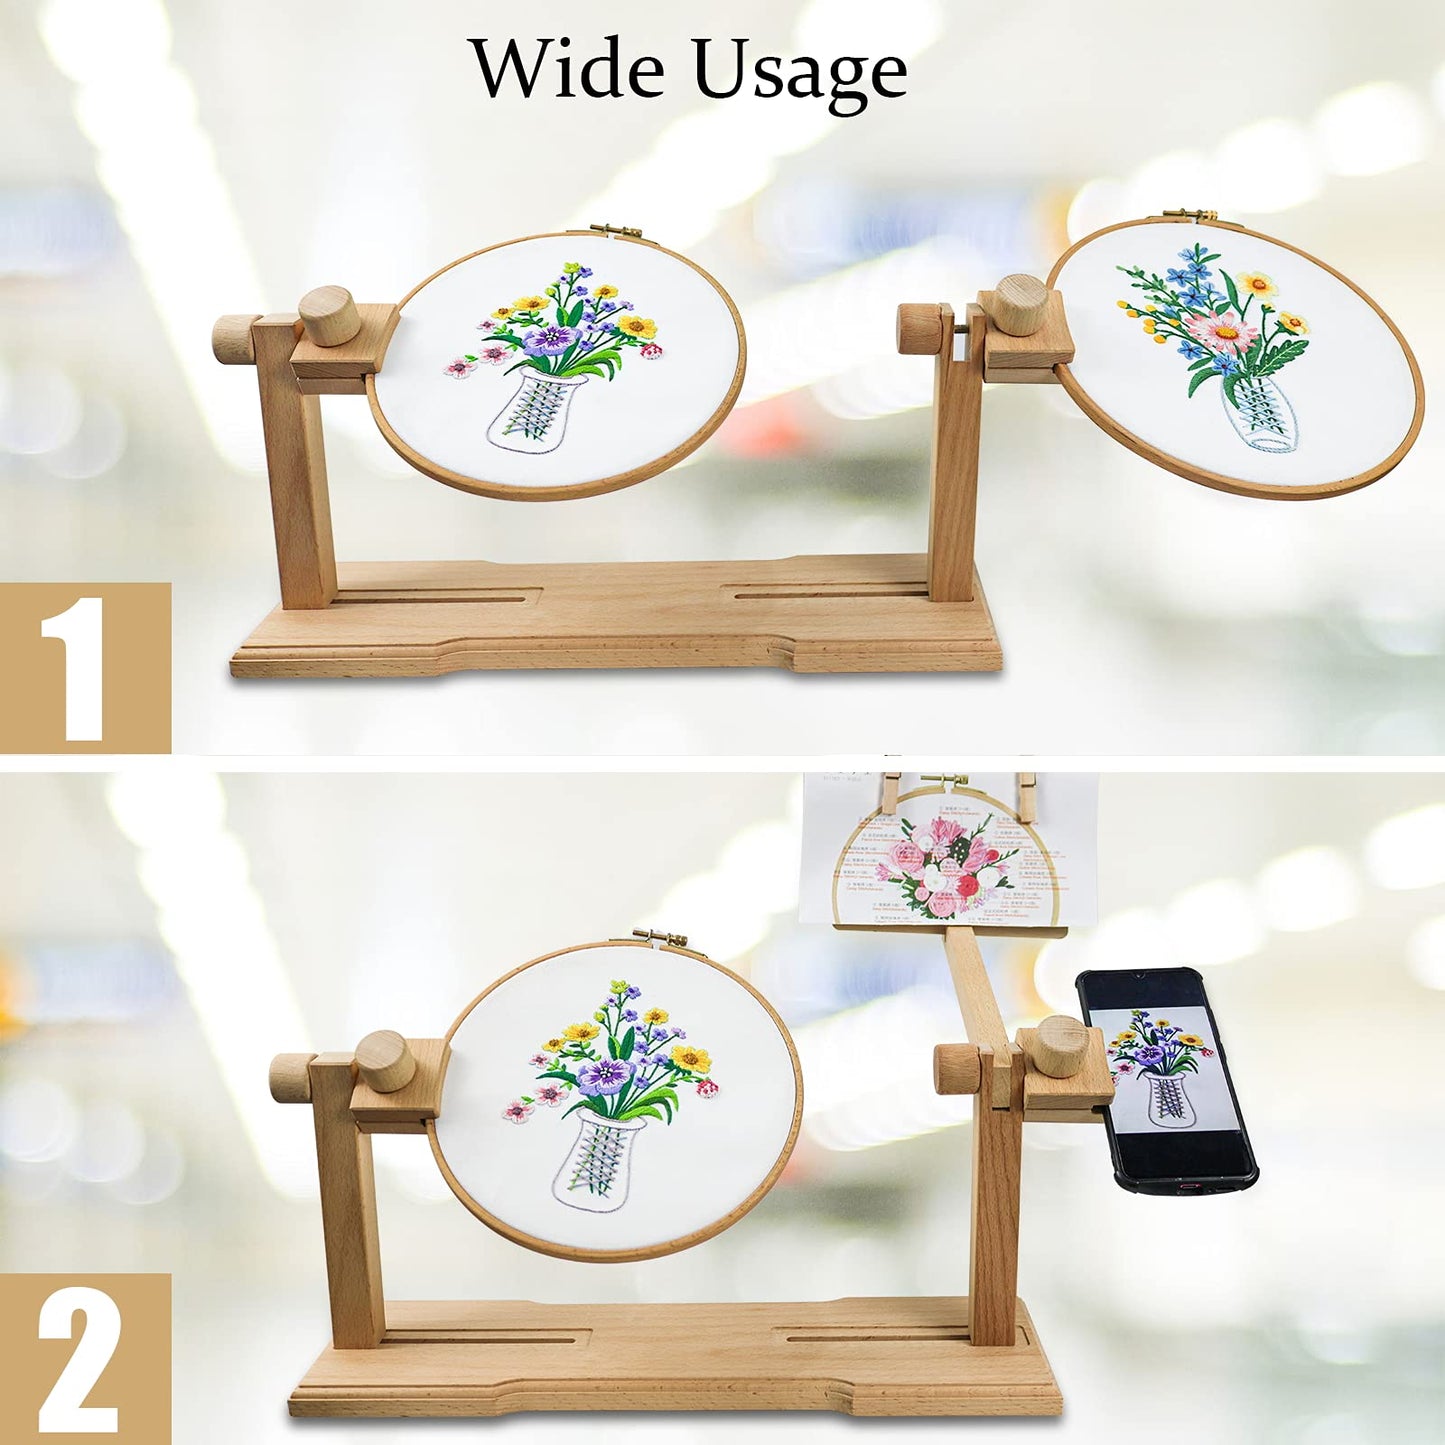 Embroidery Hoop Stand - Size Adjustable Cross Stitch Lap Stand Rotated Wooden Needlepoint Hoop Holder Stand Floor for Sewing Craft Supplies